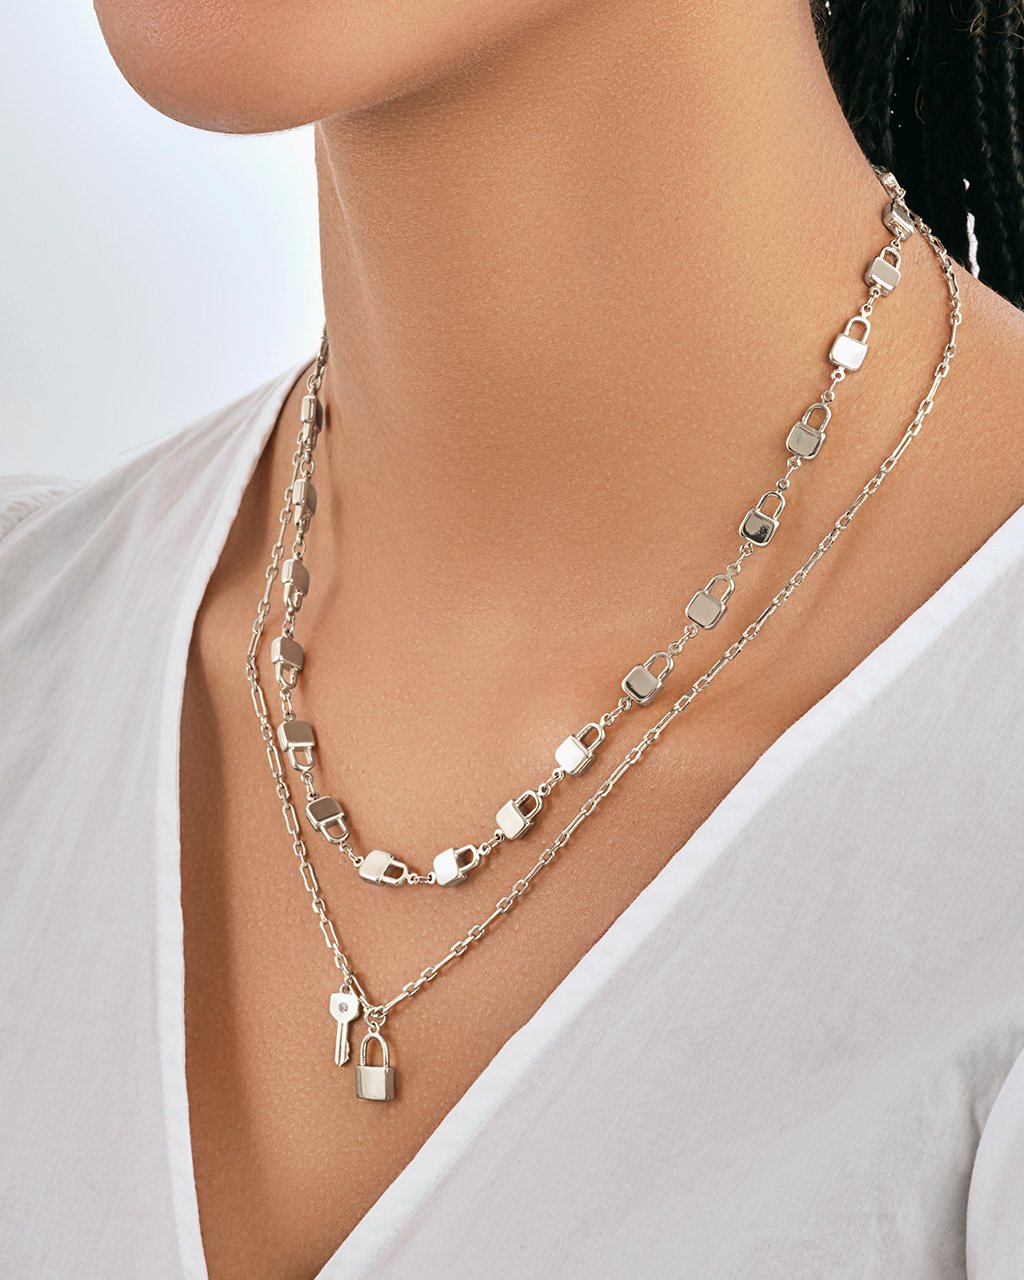 Lock & Key Layered Necklace Necklace Sterling Forever 